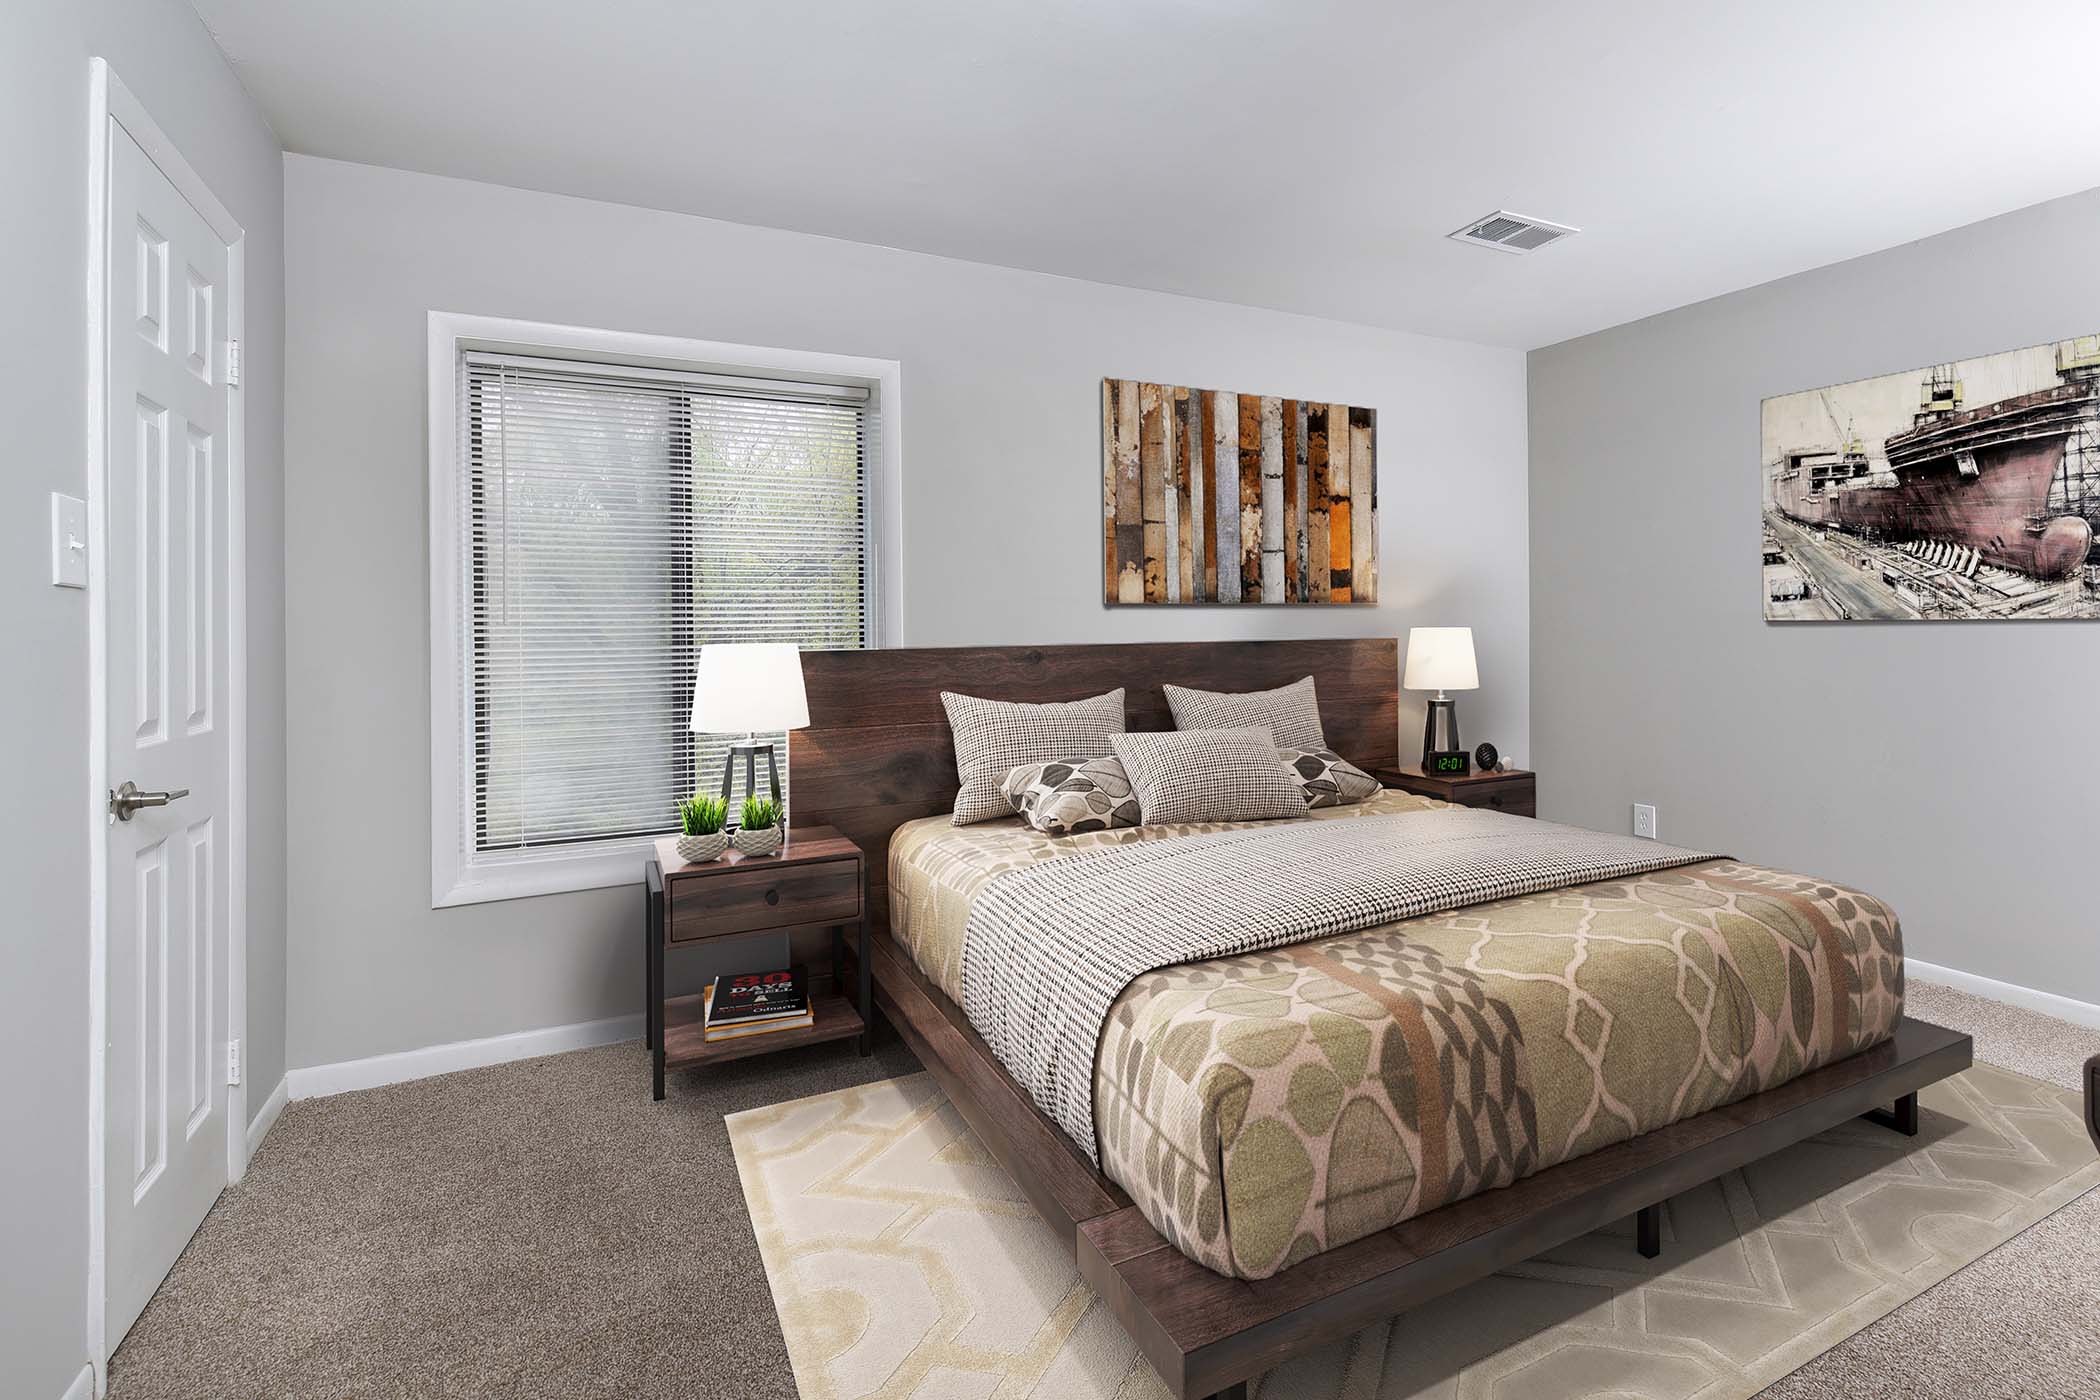 Second bedroom at The Flats at Columbia Pike in Silver Spring, Maryland